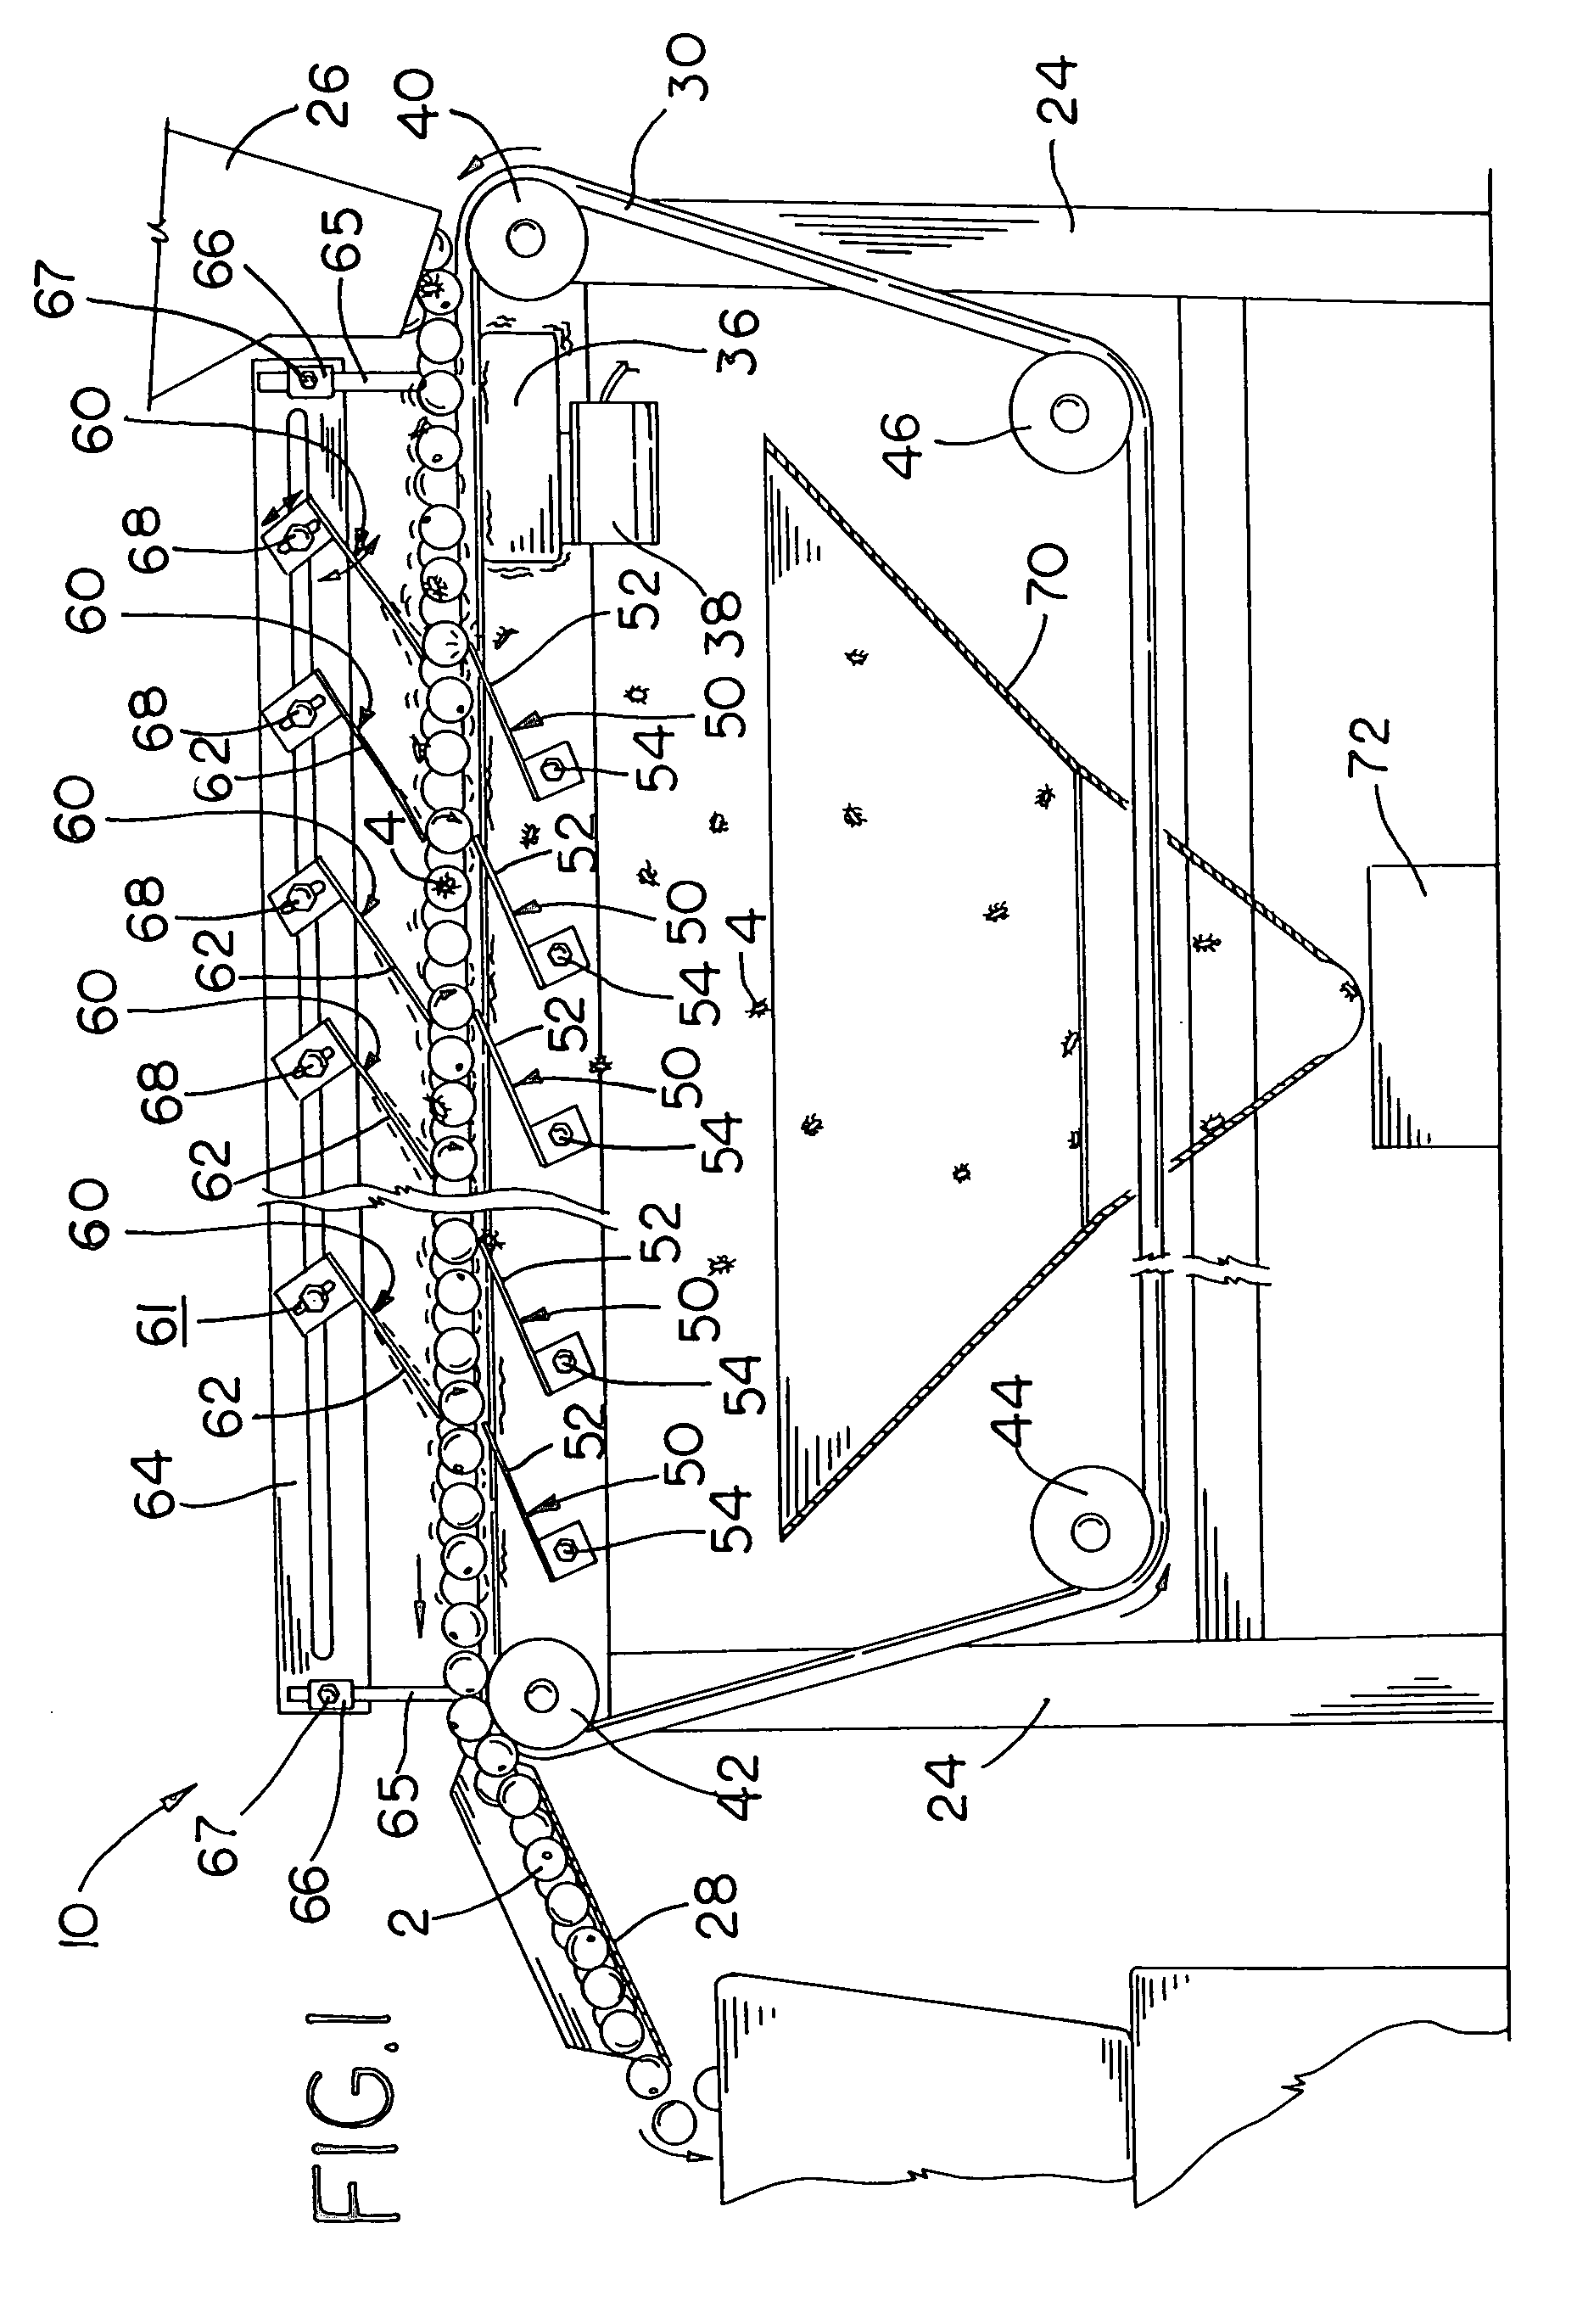 Apparatus for removing insects from produce